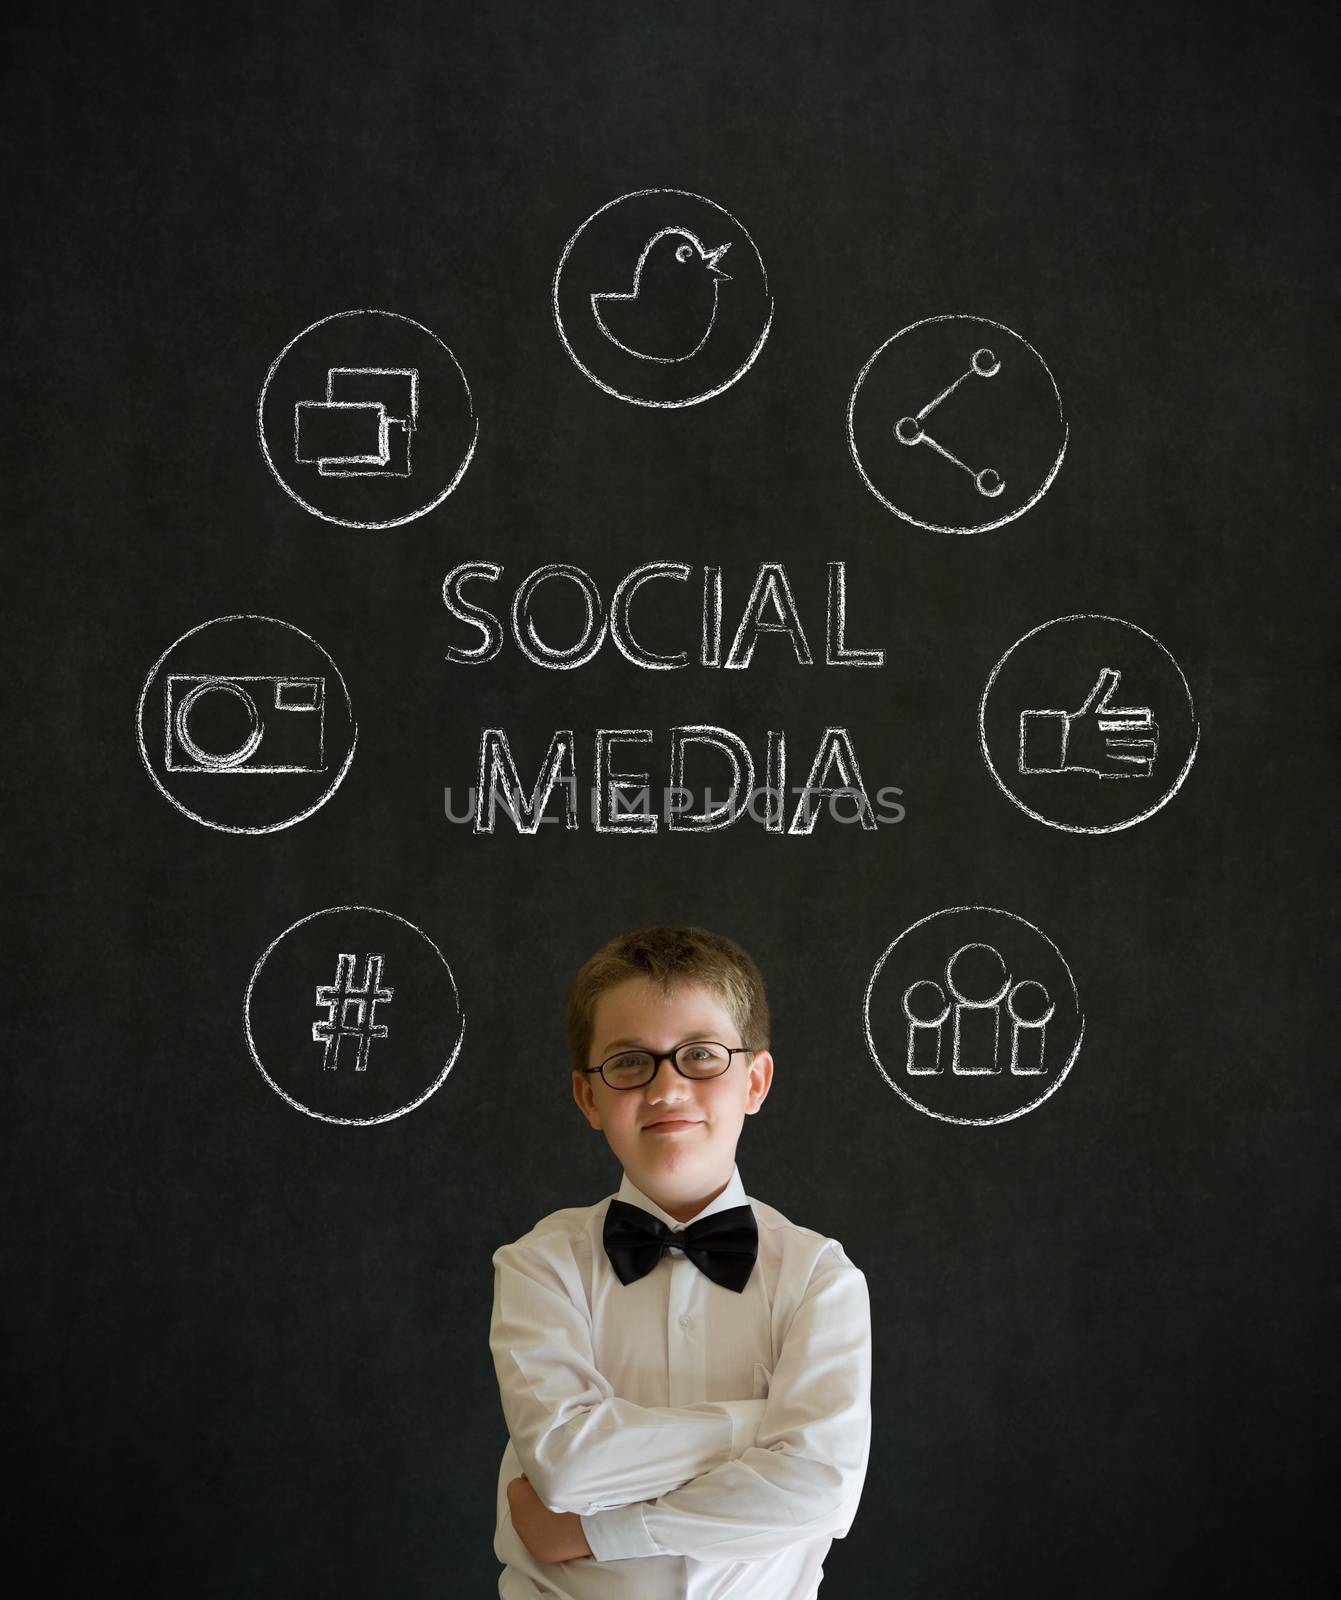 Thinking boy dressed up as business man with social media icons on blackboard background